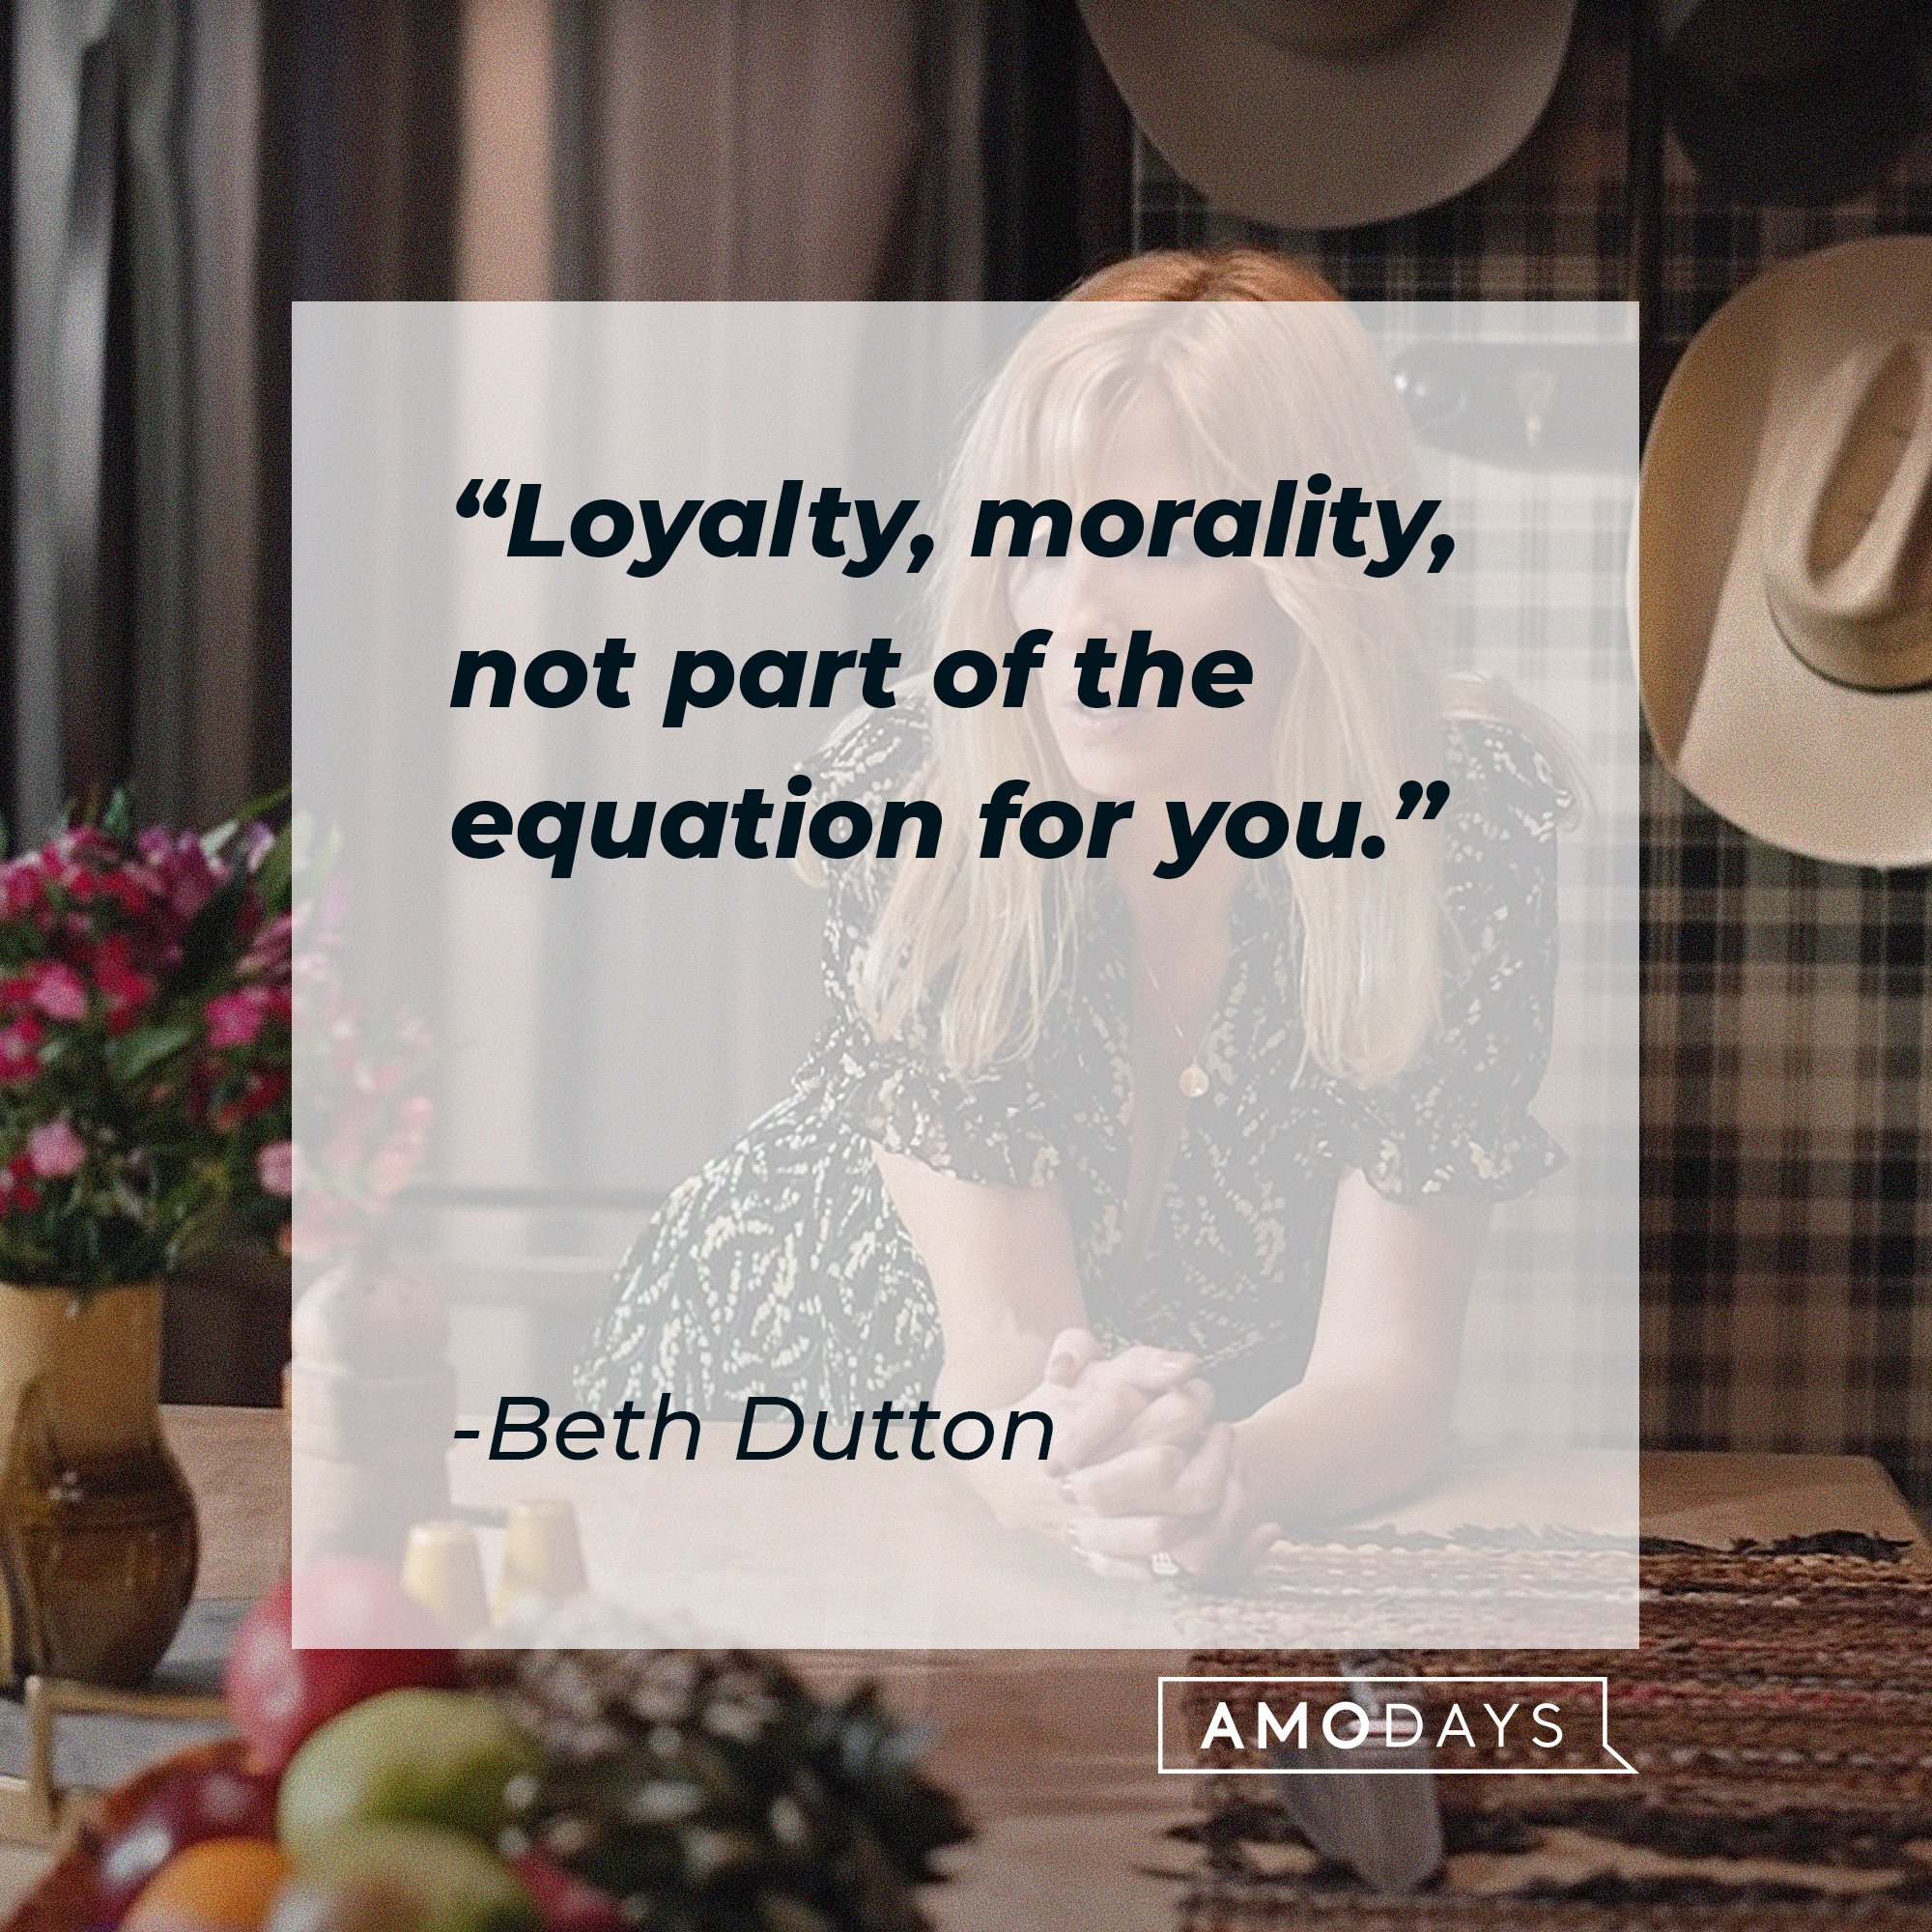  Beth Dutton's quote: "Loyalty, morality, not part of the equation for you." | Source: AmoDays